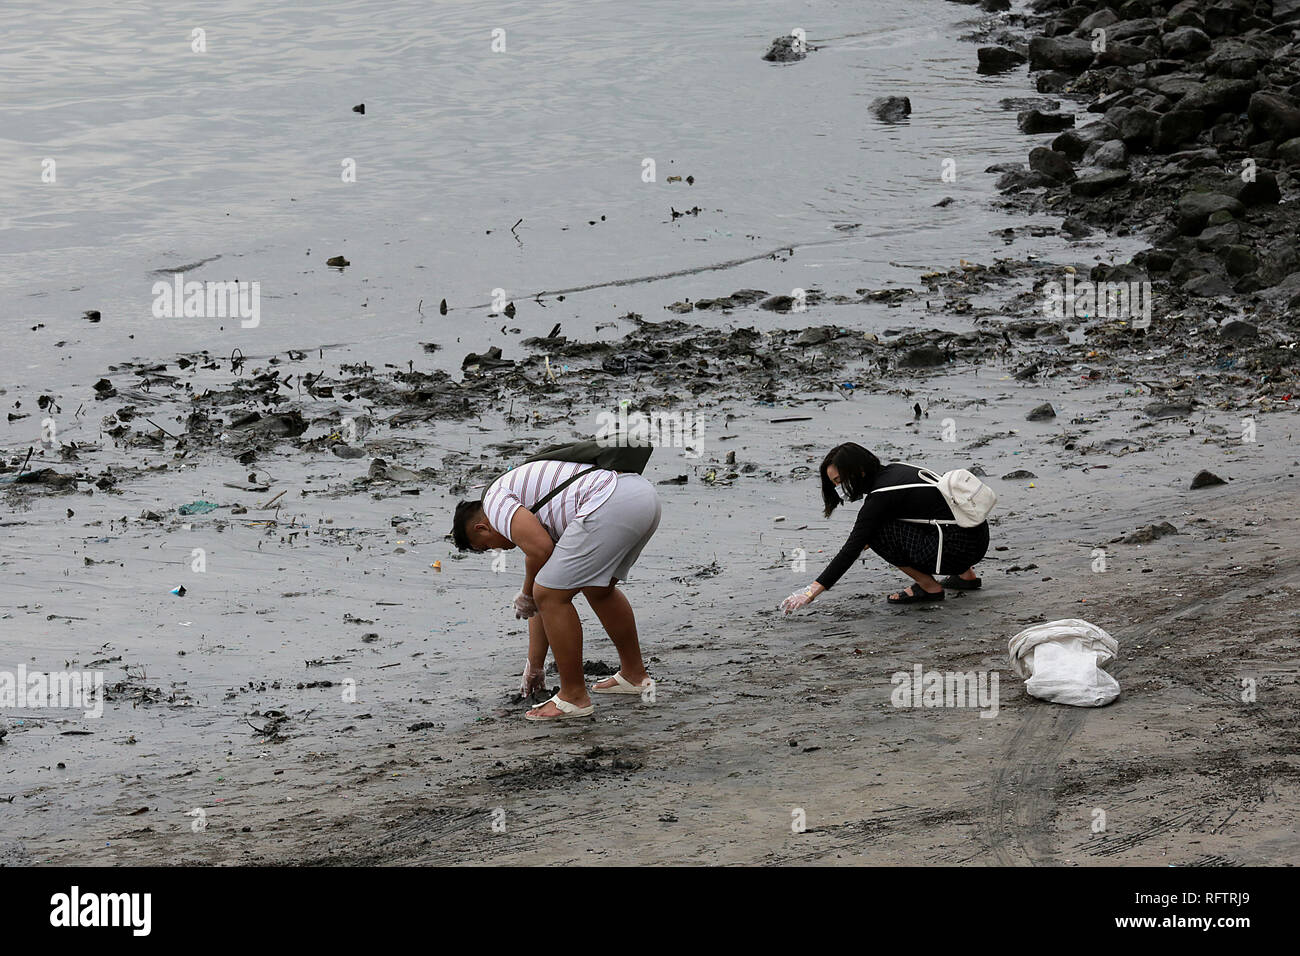 Manila, Philippines. 27th Jan, 2019. Volunteers pick up trash along the coast of Manila Bay in Manila, the Philippines, Jan. 27, 2019. Around 5,000 volunteers participated in the 'solidarity walk' that marks the start of the government's rehabilitation project of Manila Bay. Credit: Rouelle Umali/Xinhua/Alamy Live News Stock Photo